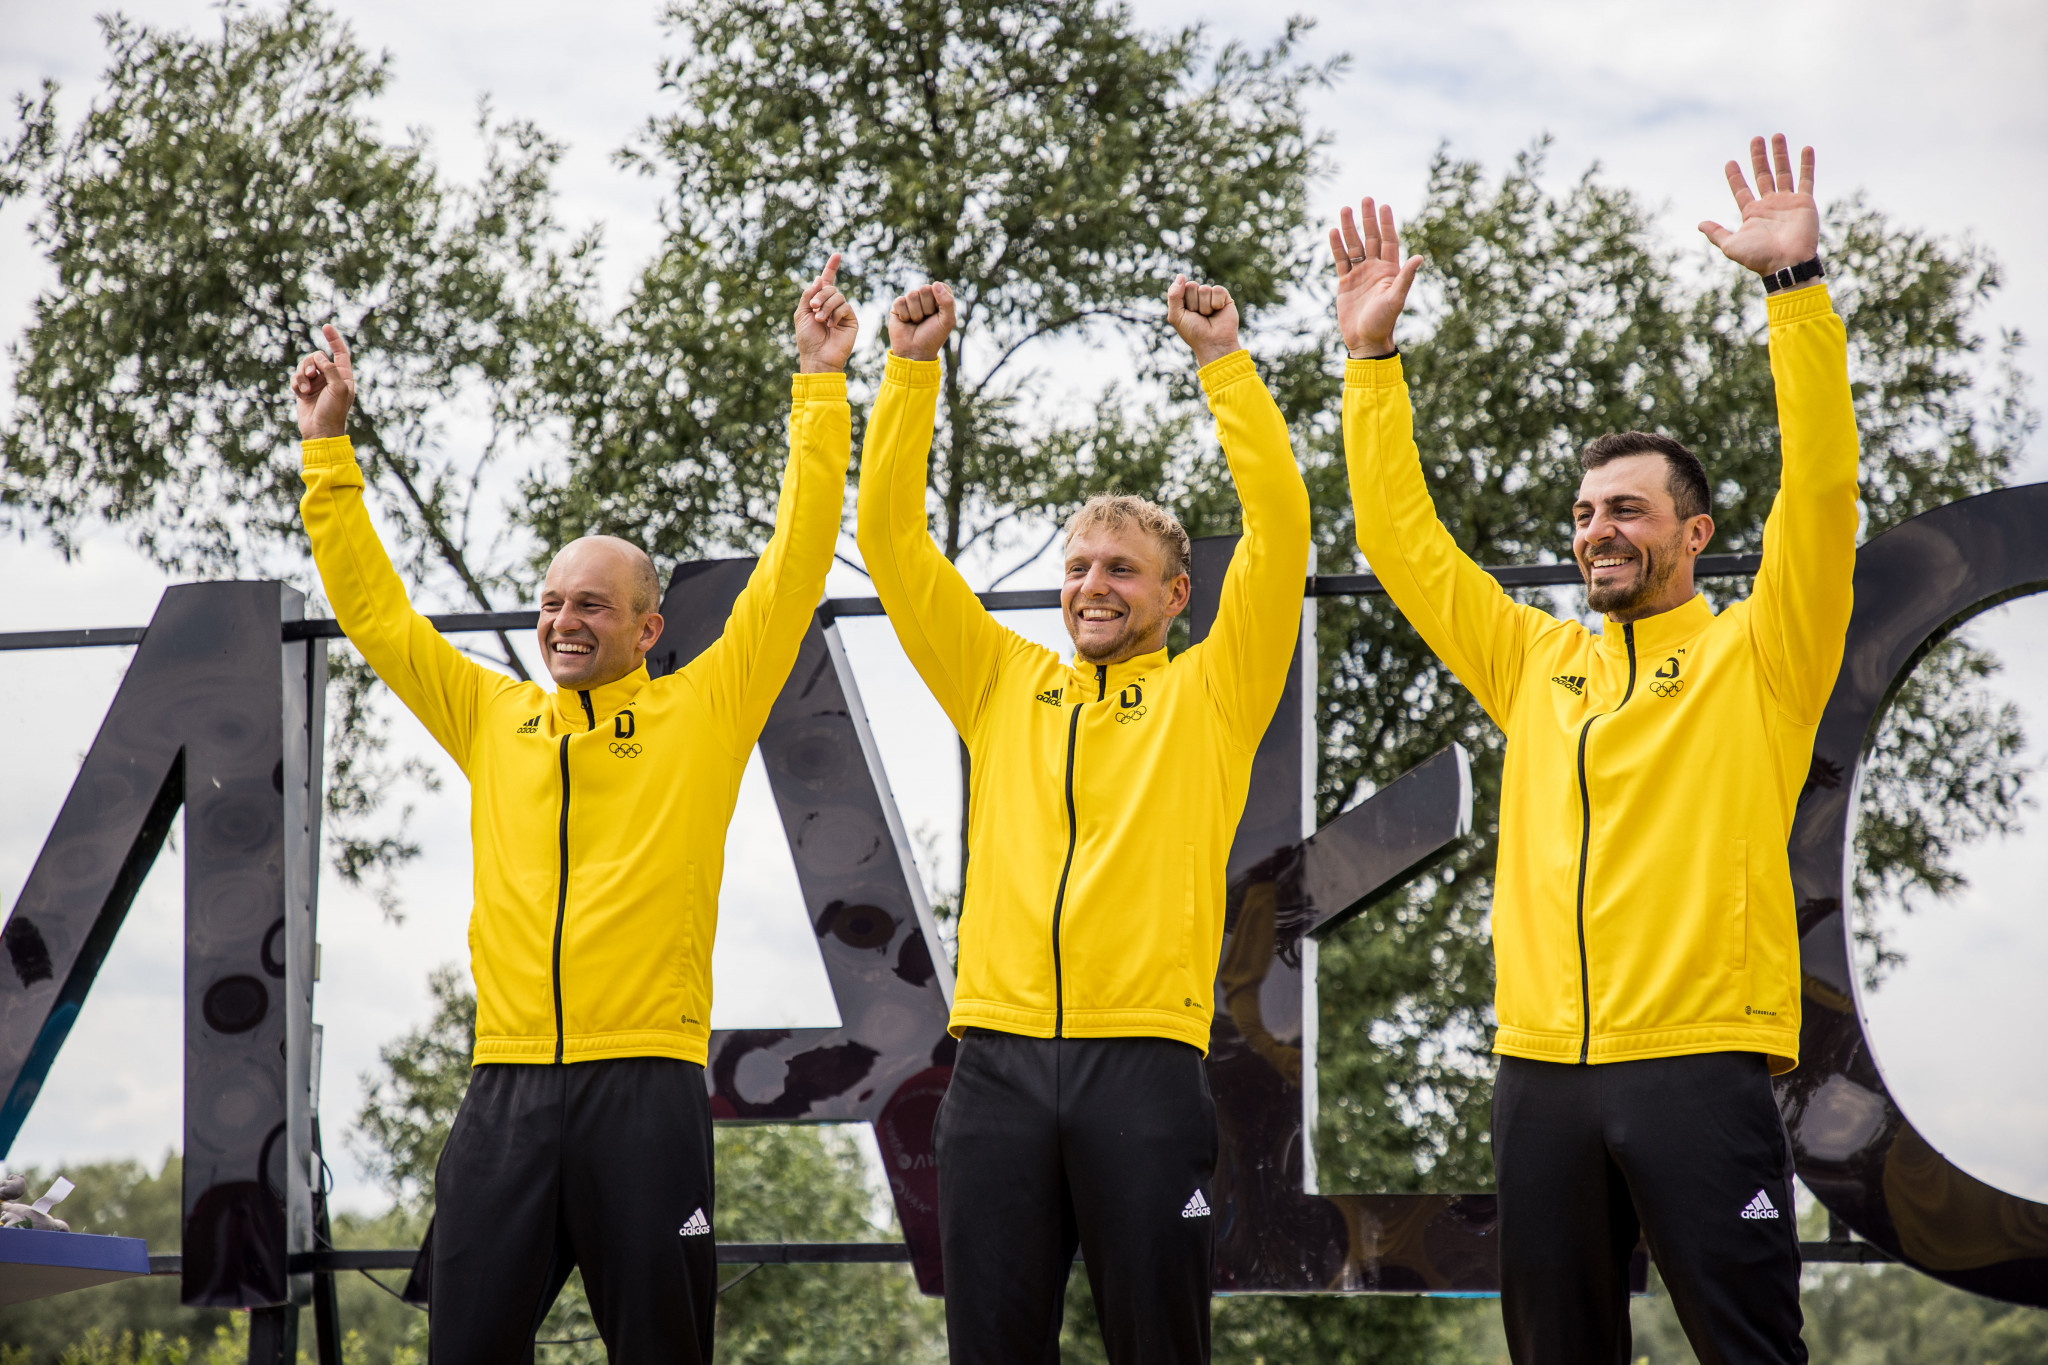 Germany won the first gold of the day at the European Games in the men's C1 team canoe slalom event ©Kraków-Małopolska 2023